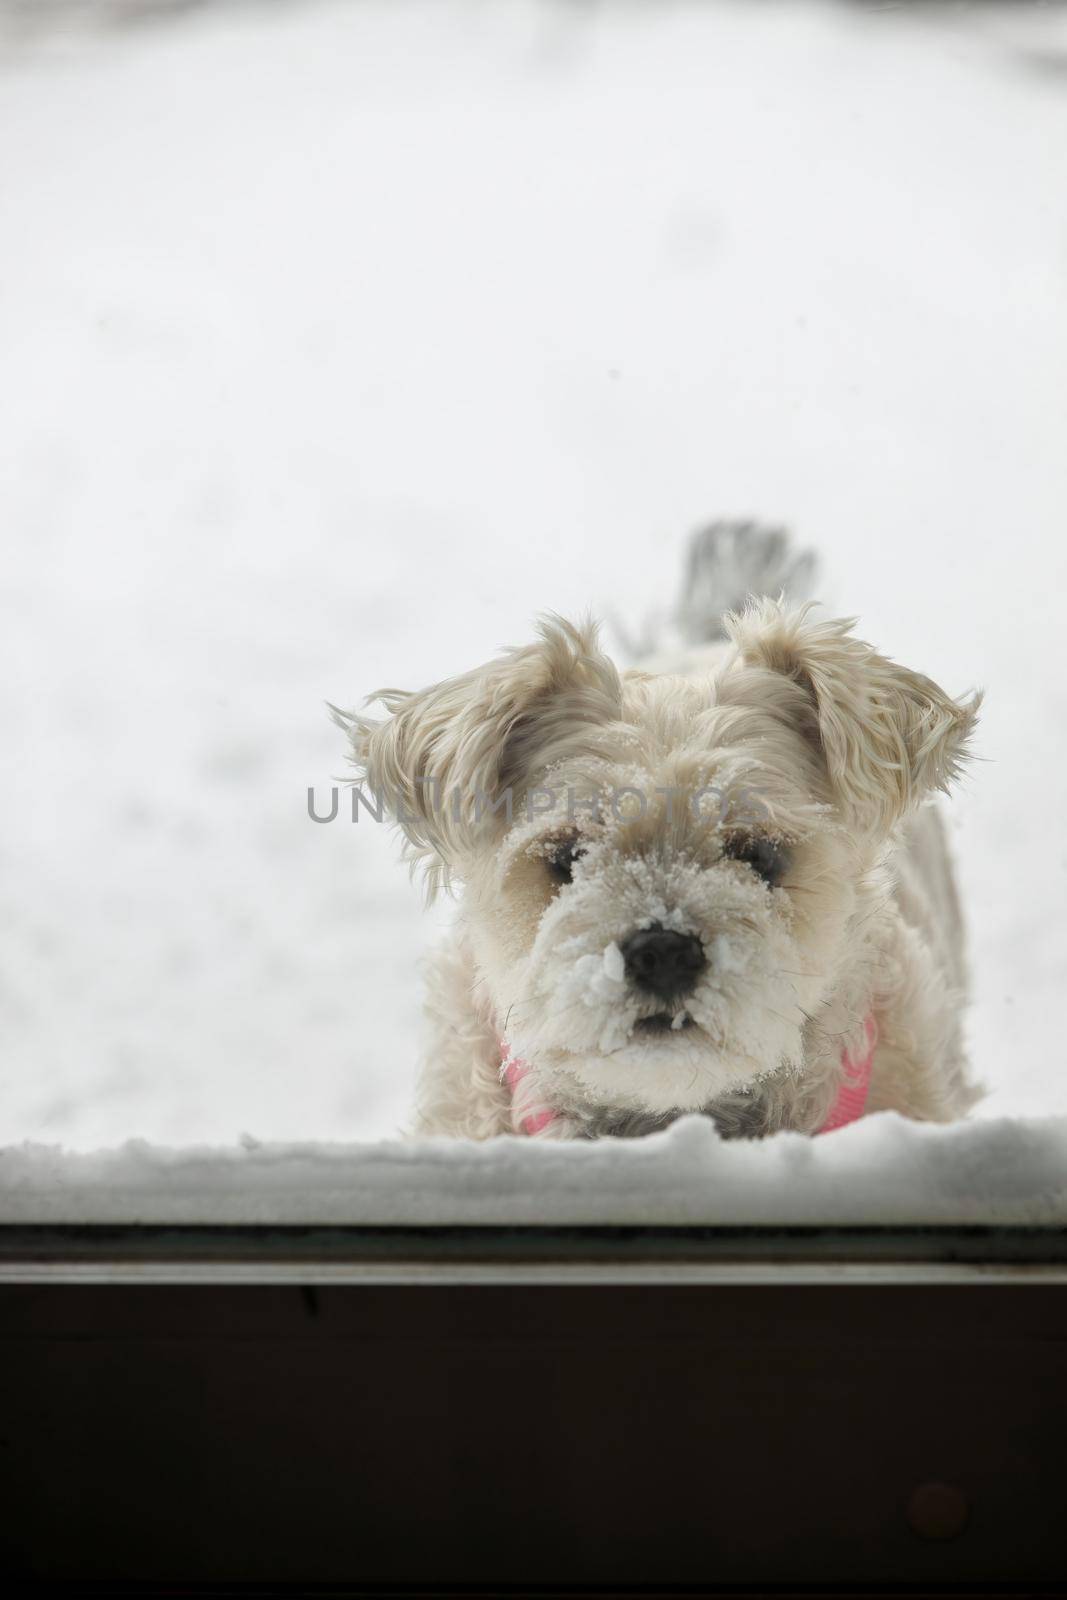 A Snow Covered Yorkie Schnauzer Dog Waiting to Come Inside. She is standing in the snow and looking in through a patio door.